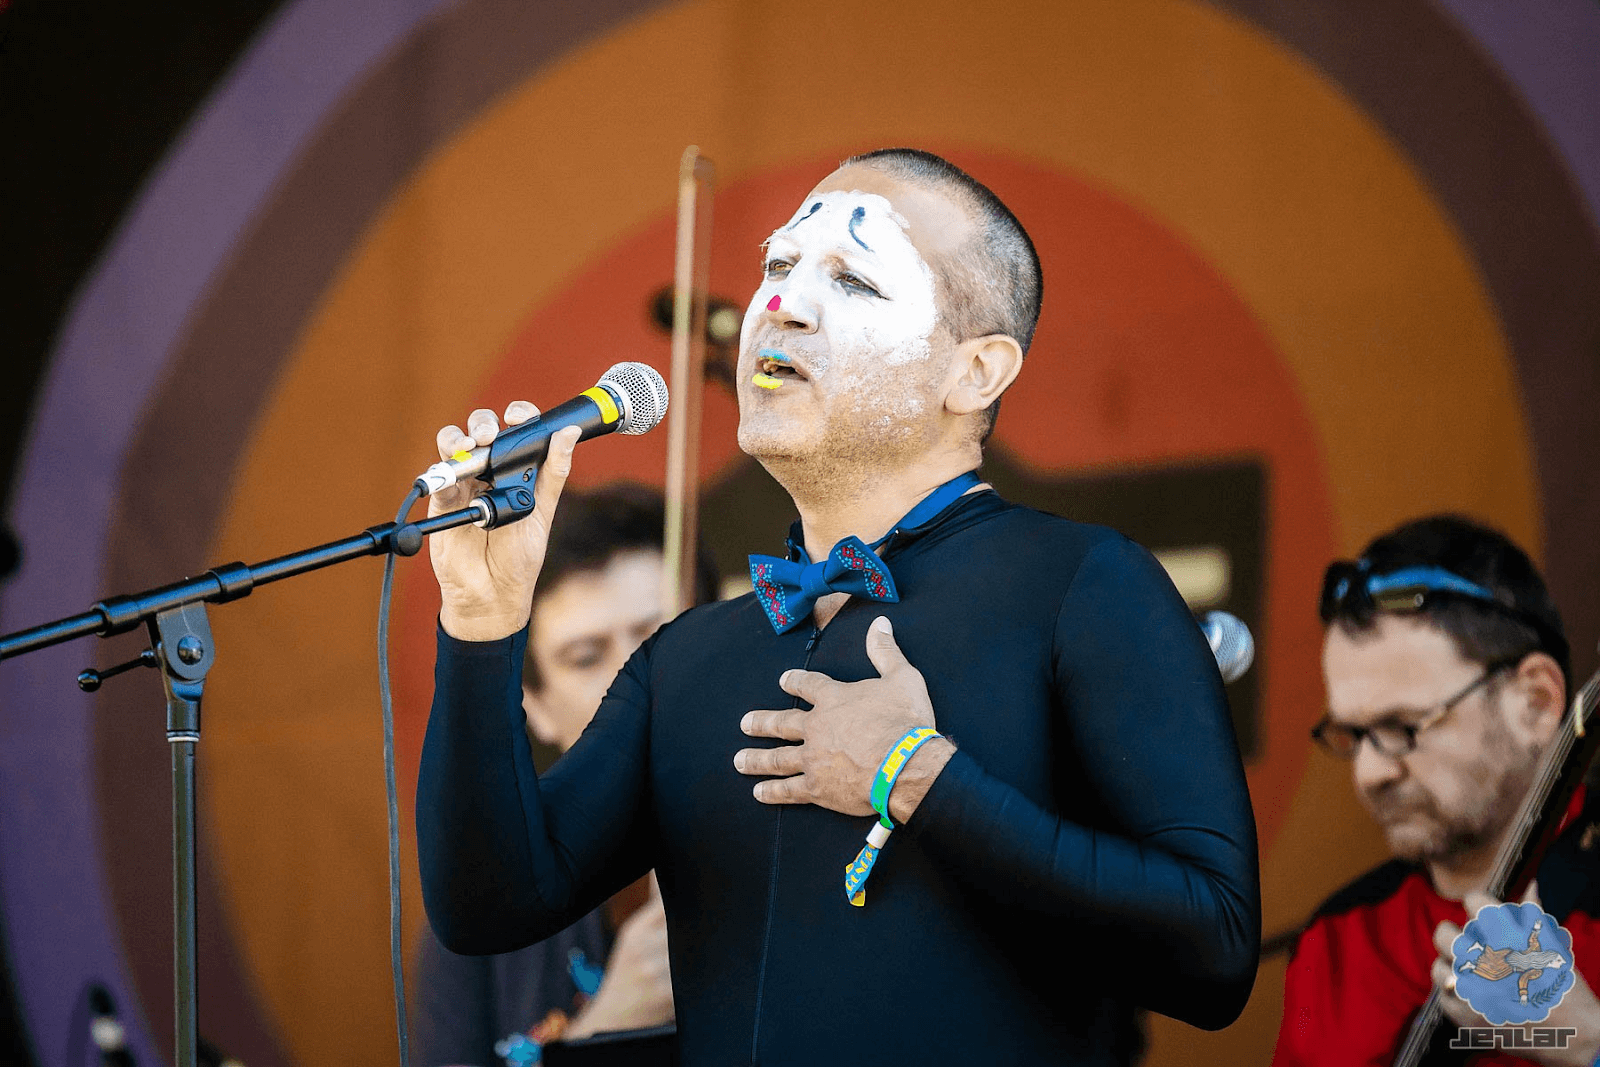 Cherkasskiy performed at the 2022 JetLAG festival dressed as a mime, with his lips painted blue and yellow in homage to the Ukrainian flag.